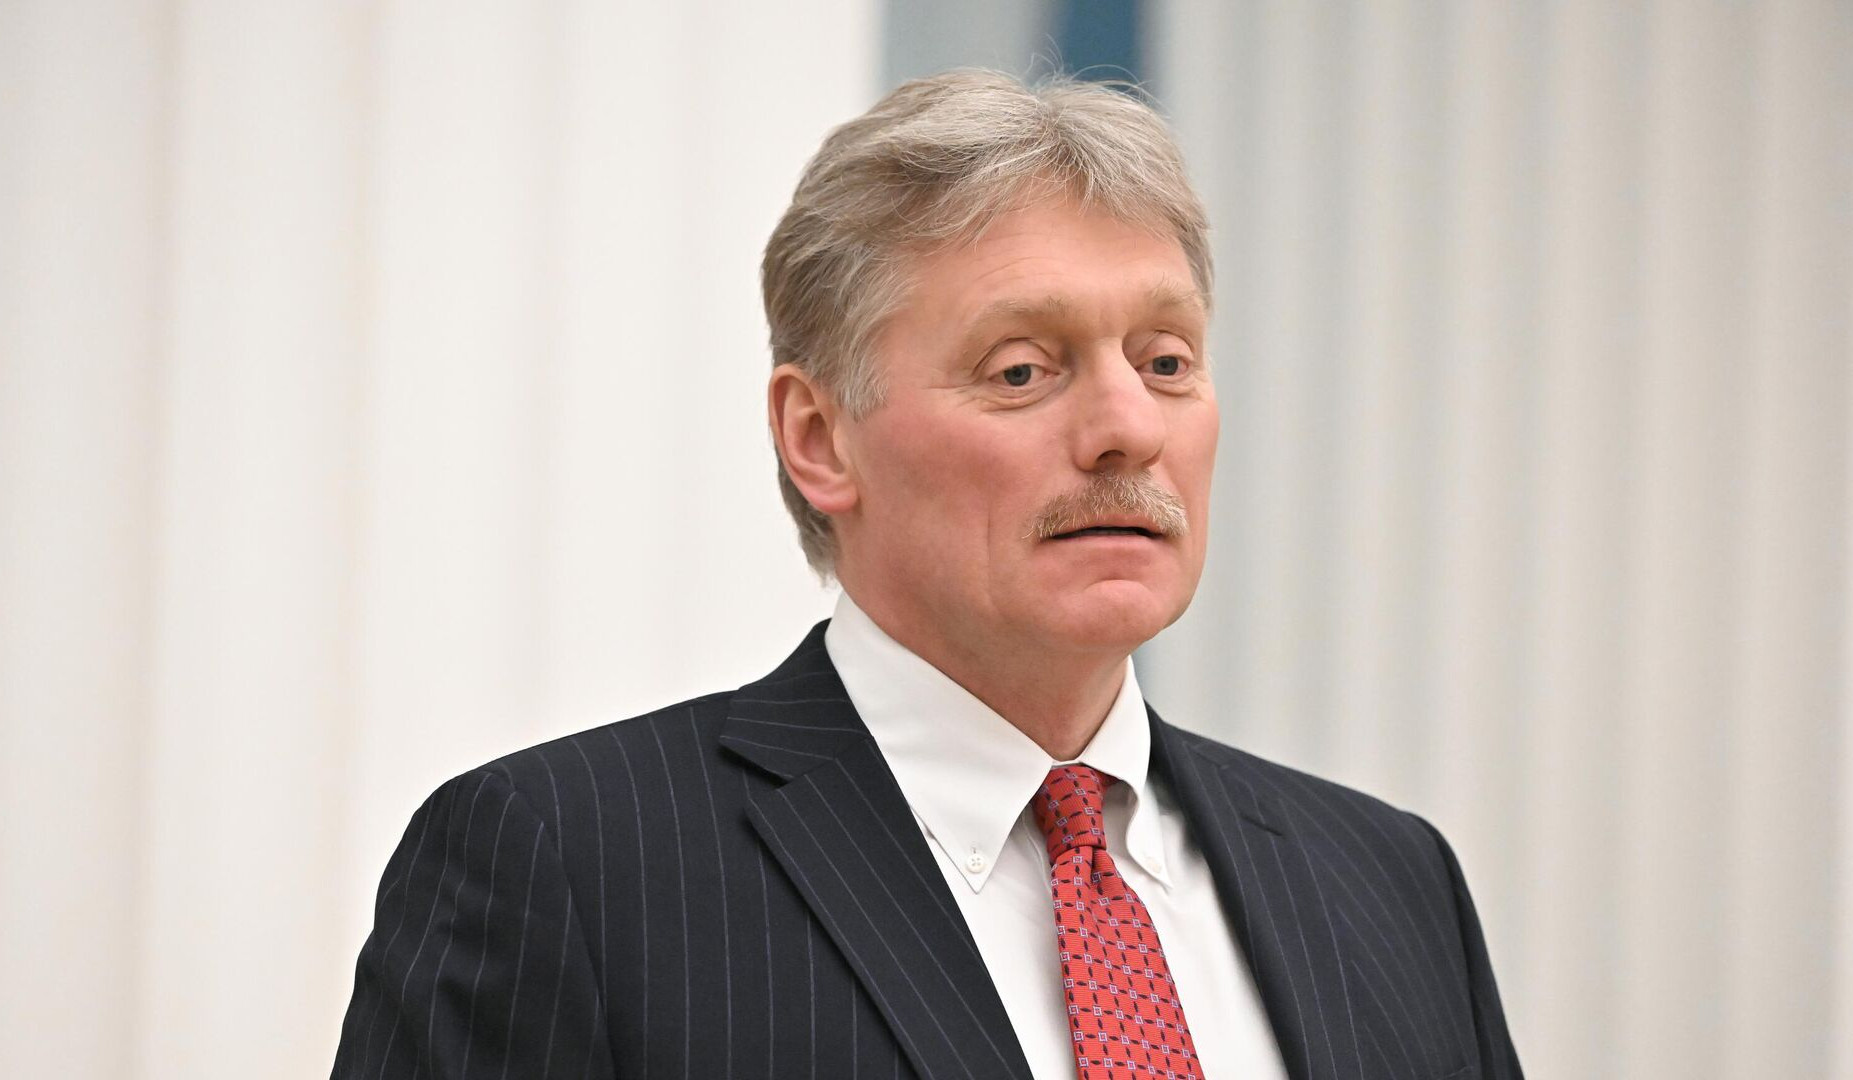 Each new arms delivery to Ukraine fuels tensions: Peskov